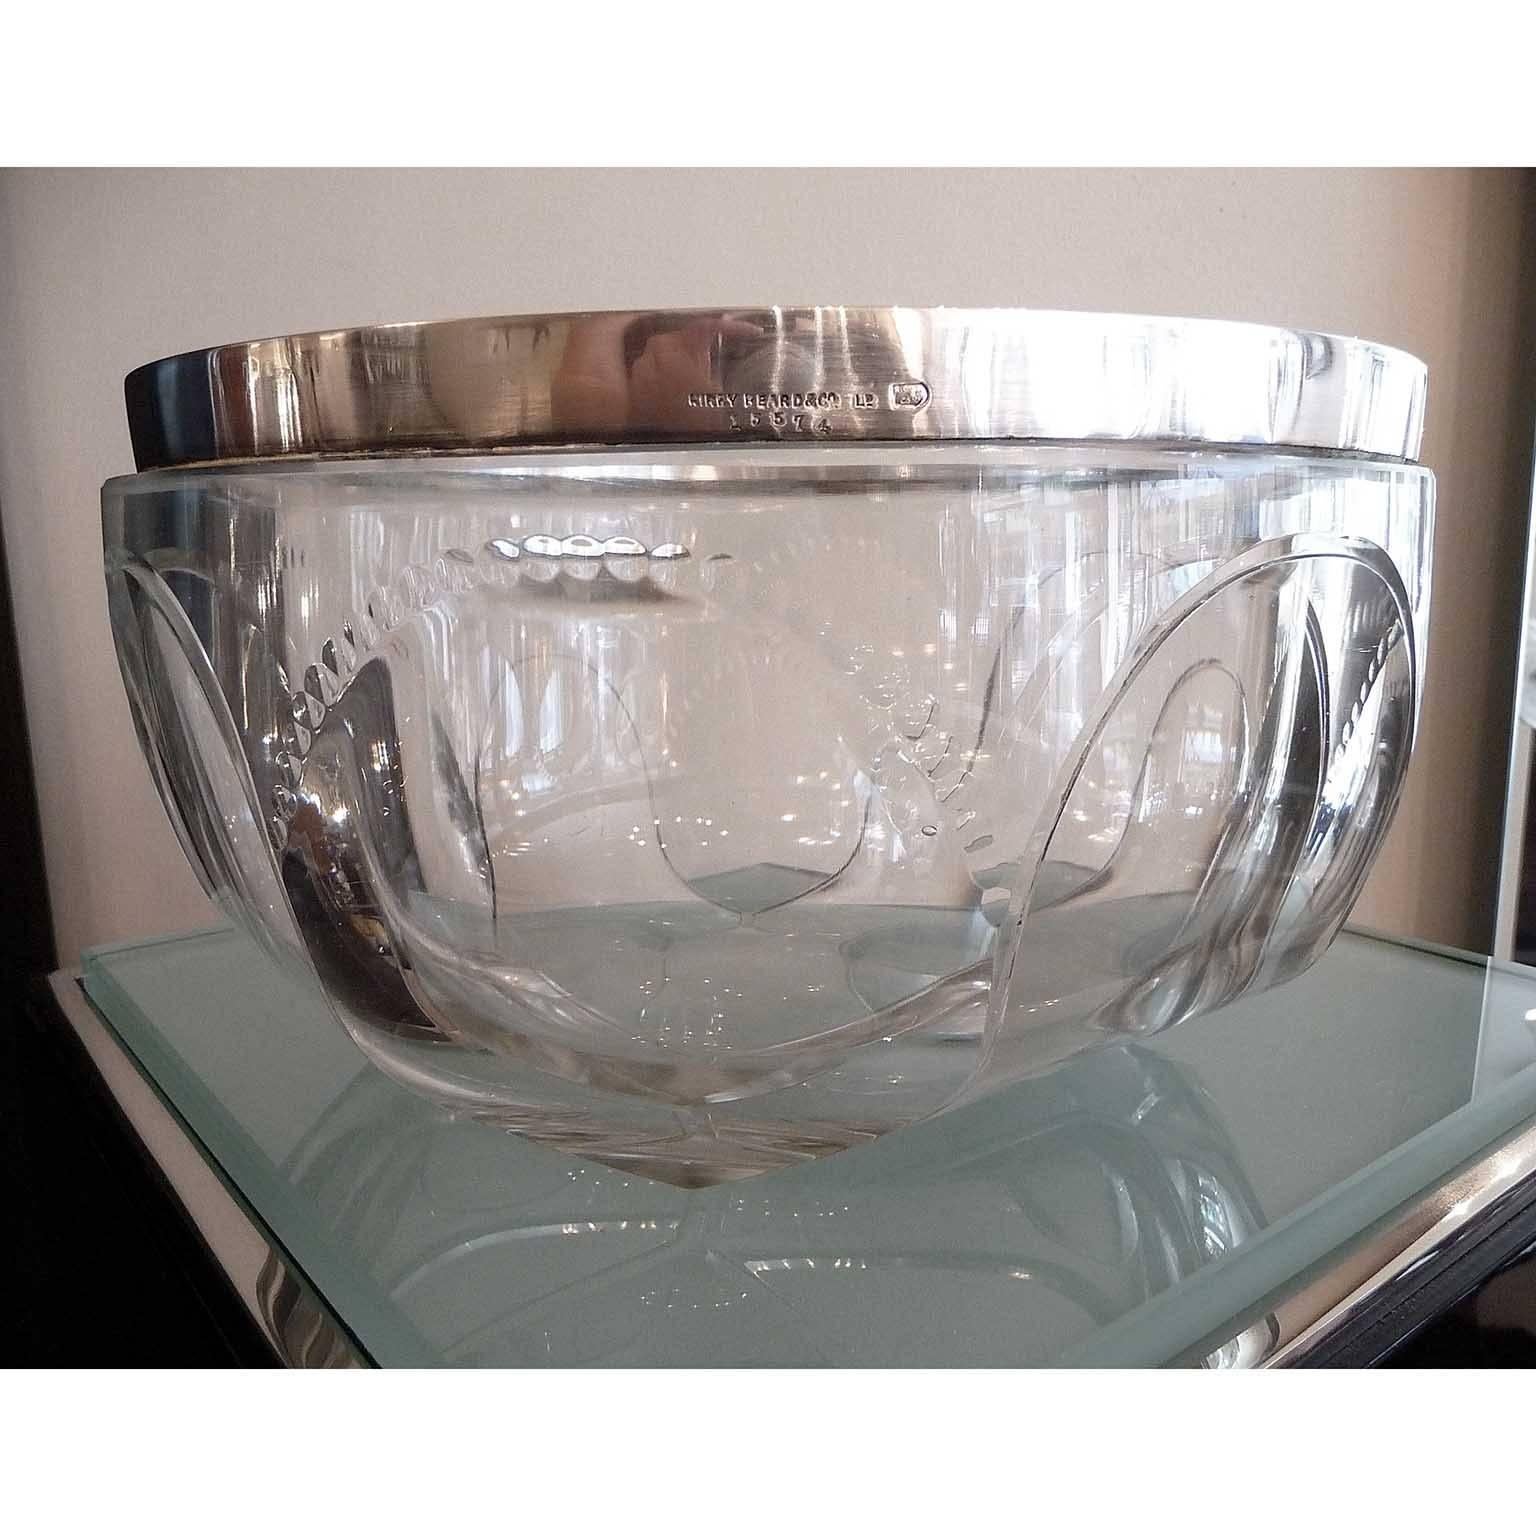 Art Deco Large Faceted Crystal Bowl with Silvered Frame by Kirby Beard and Co. For Sale 2